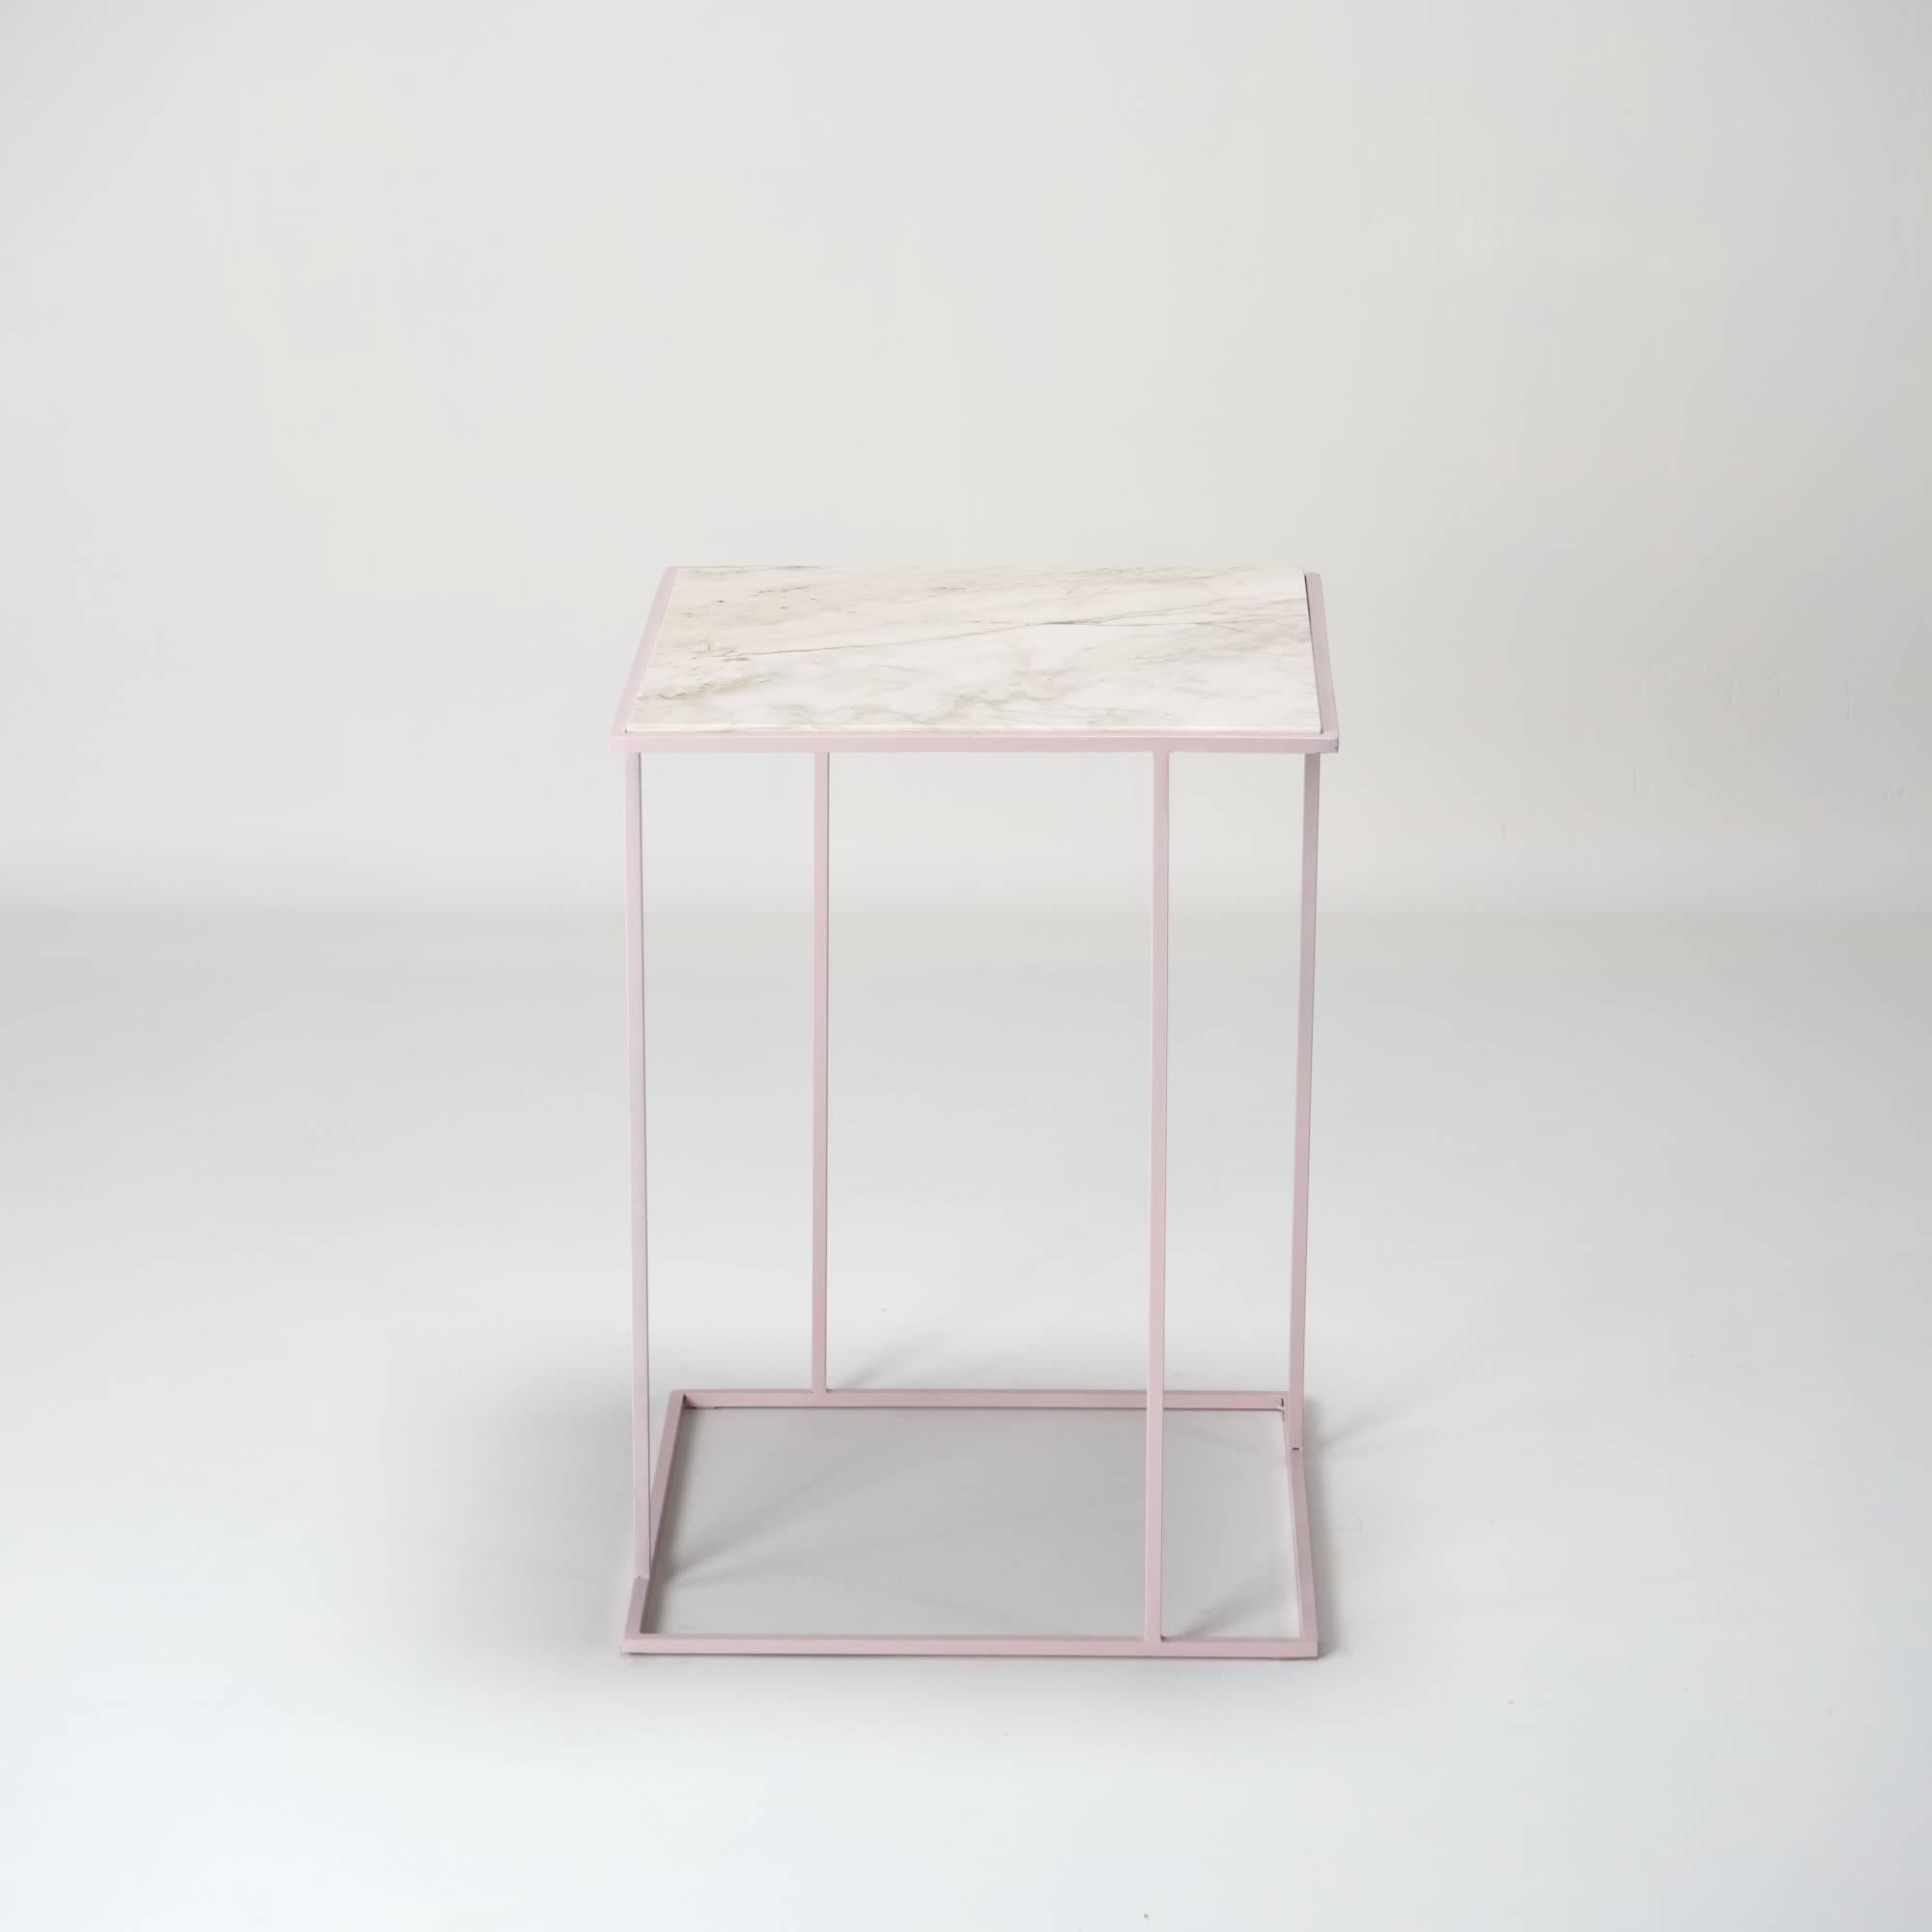 FramE is a side table designed with the intention of valuing the marble/stone top. 

The leg structure is intended as a 3D Frame inspired by Piet Mondrian paintings.

It comes in different varieties. In this case we used the beautiful Roman